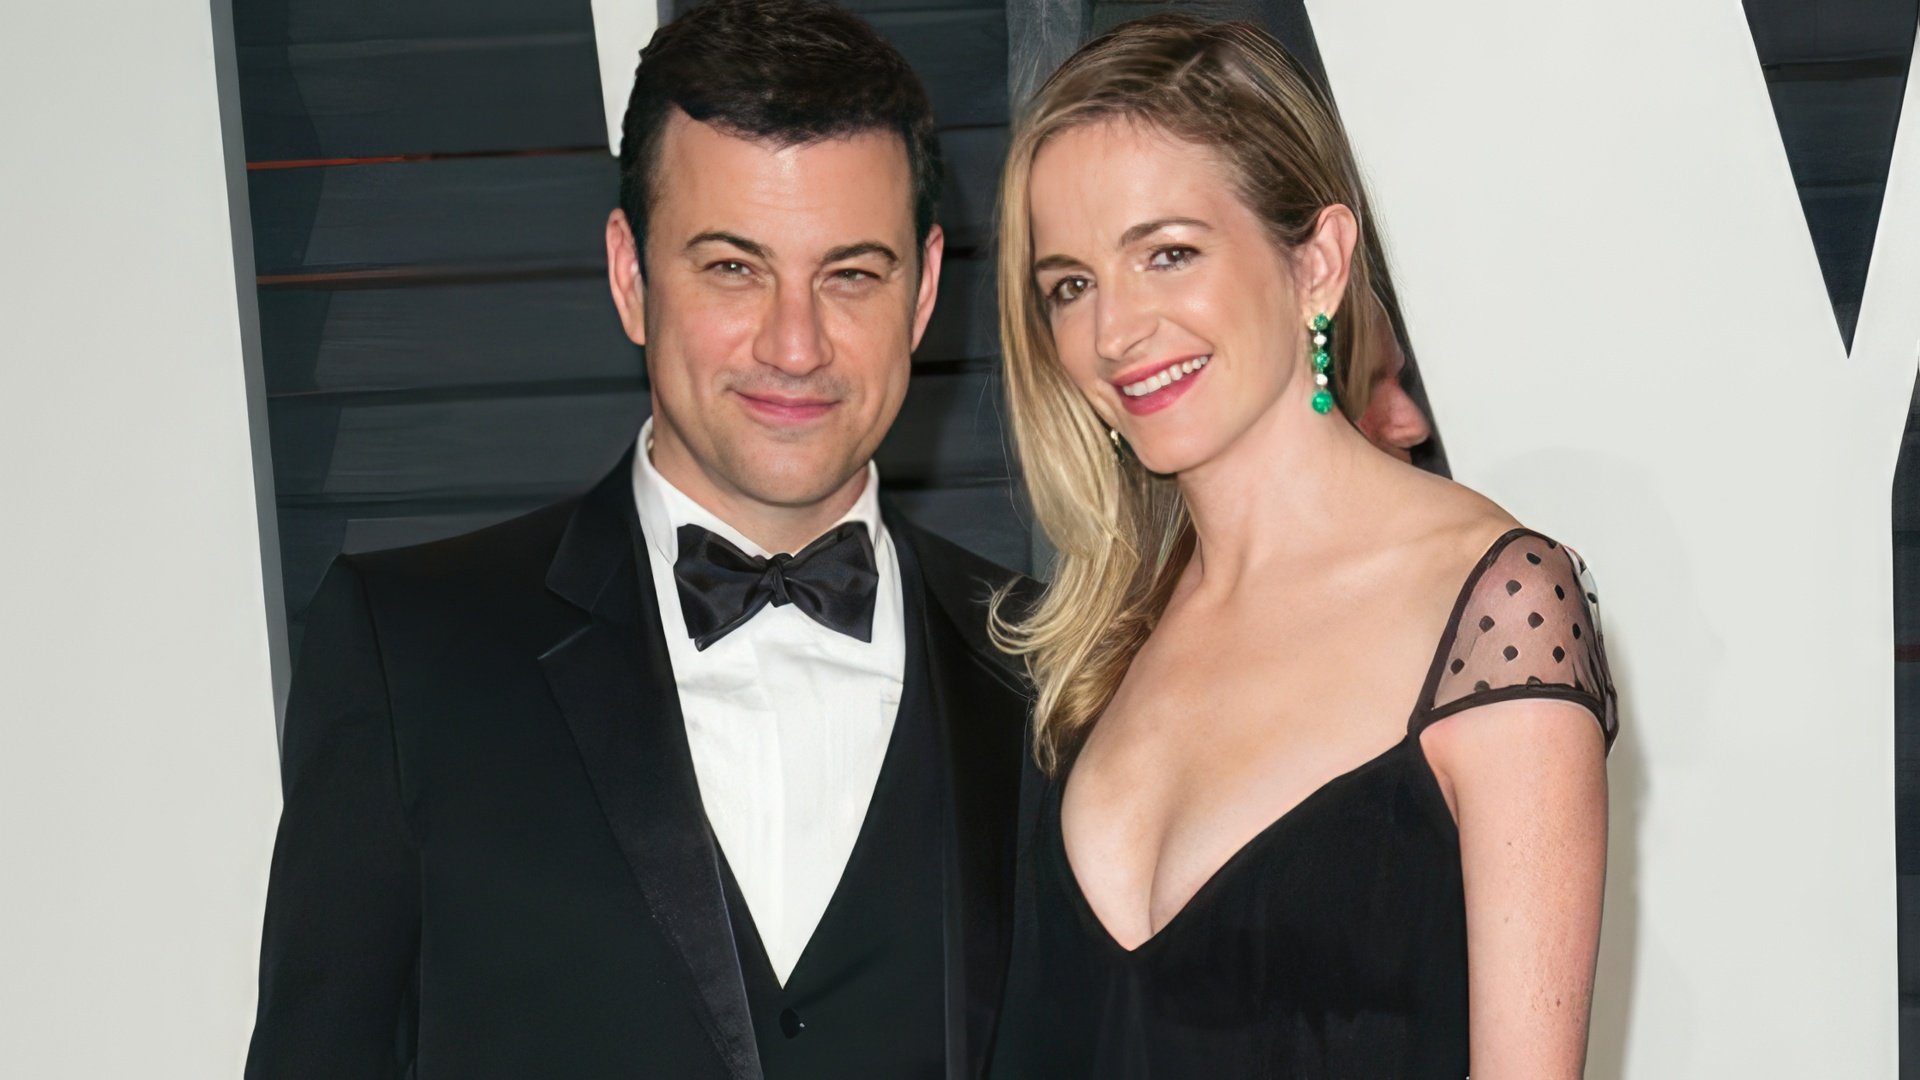 Jimmy Kimmel and his wife Molly McNearney